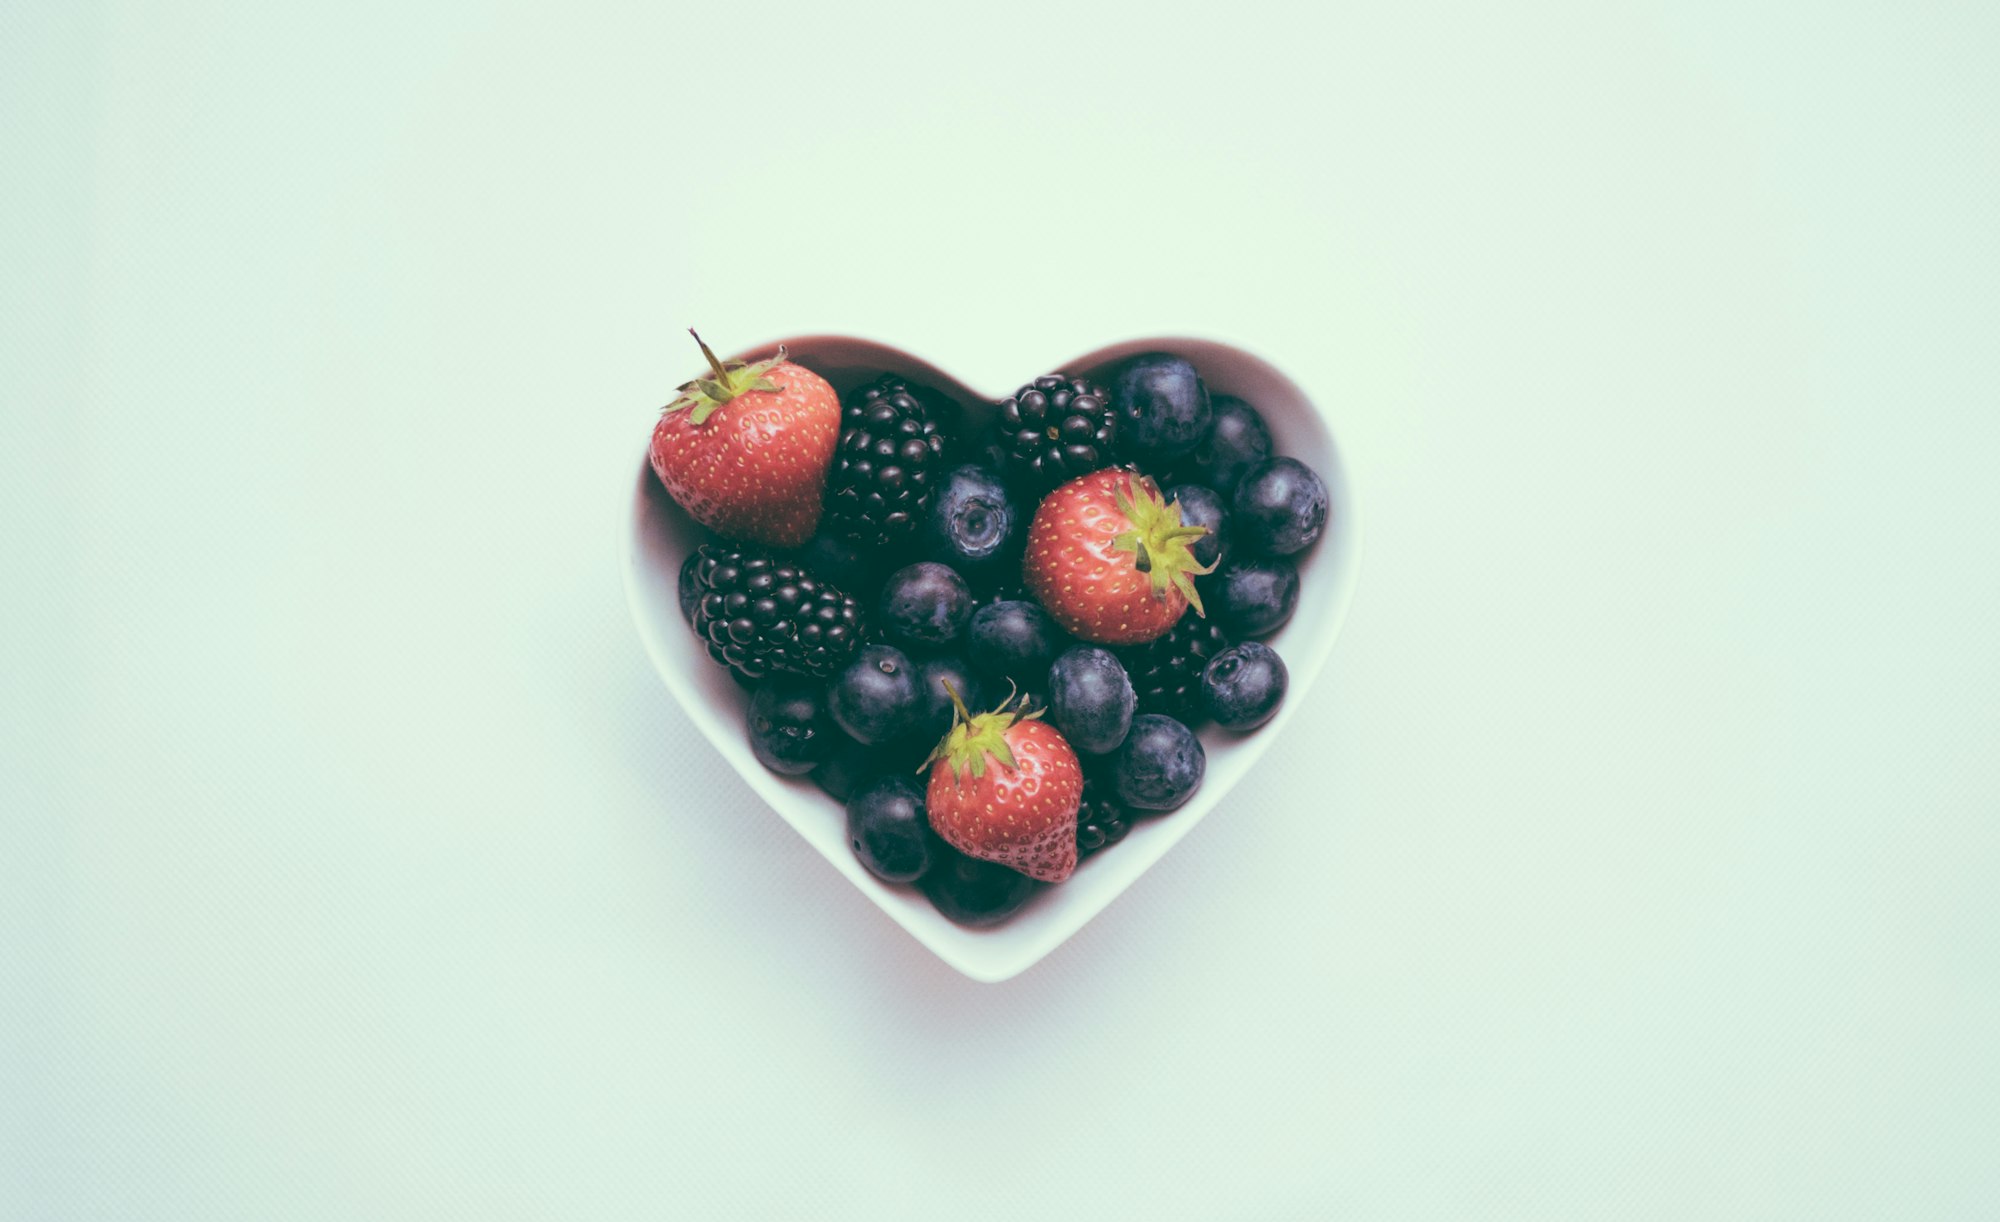 Maximize Heart Health With 3 Simple Tips